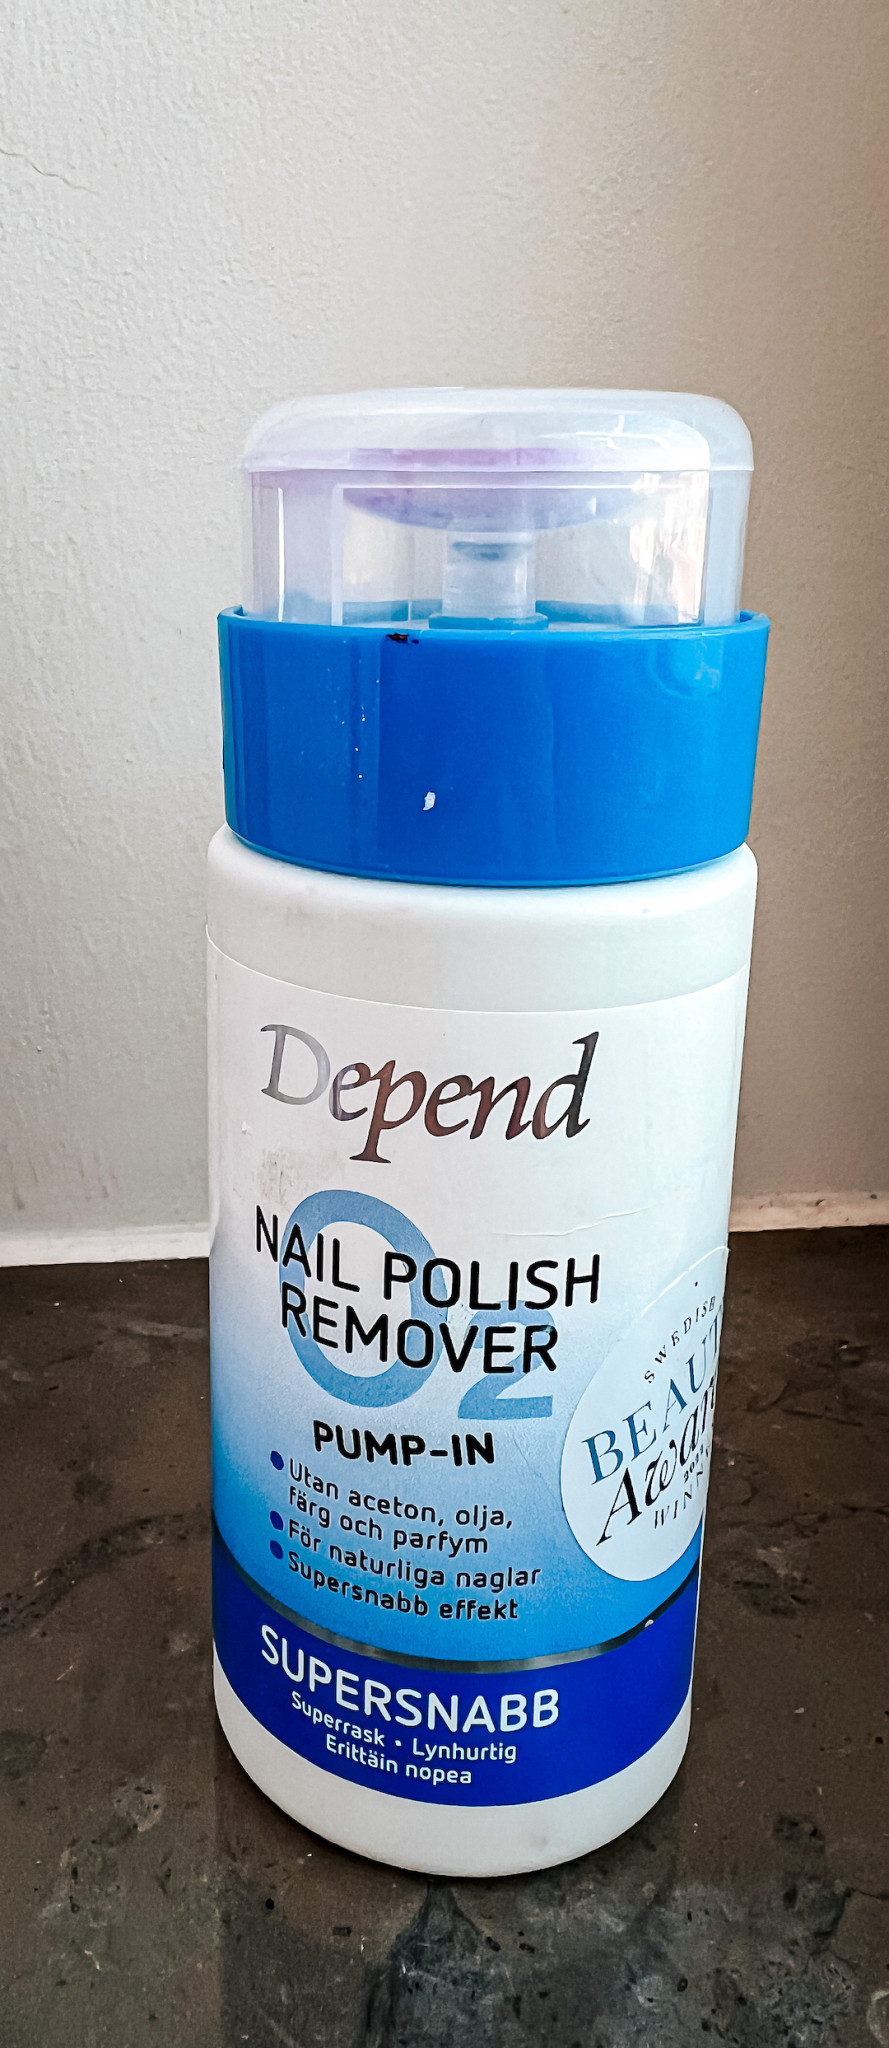  Depend Pump-in remover